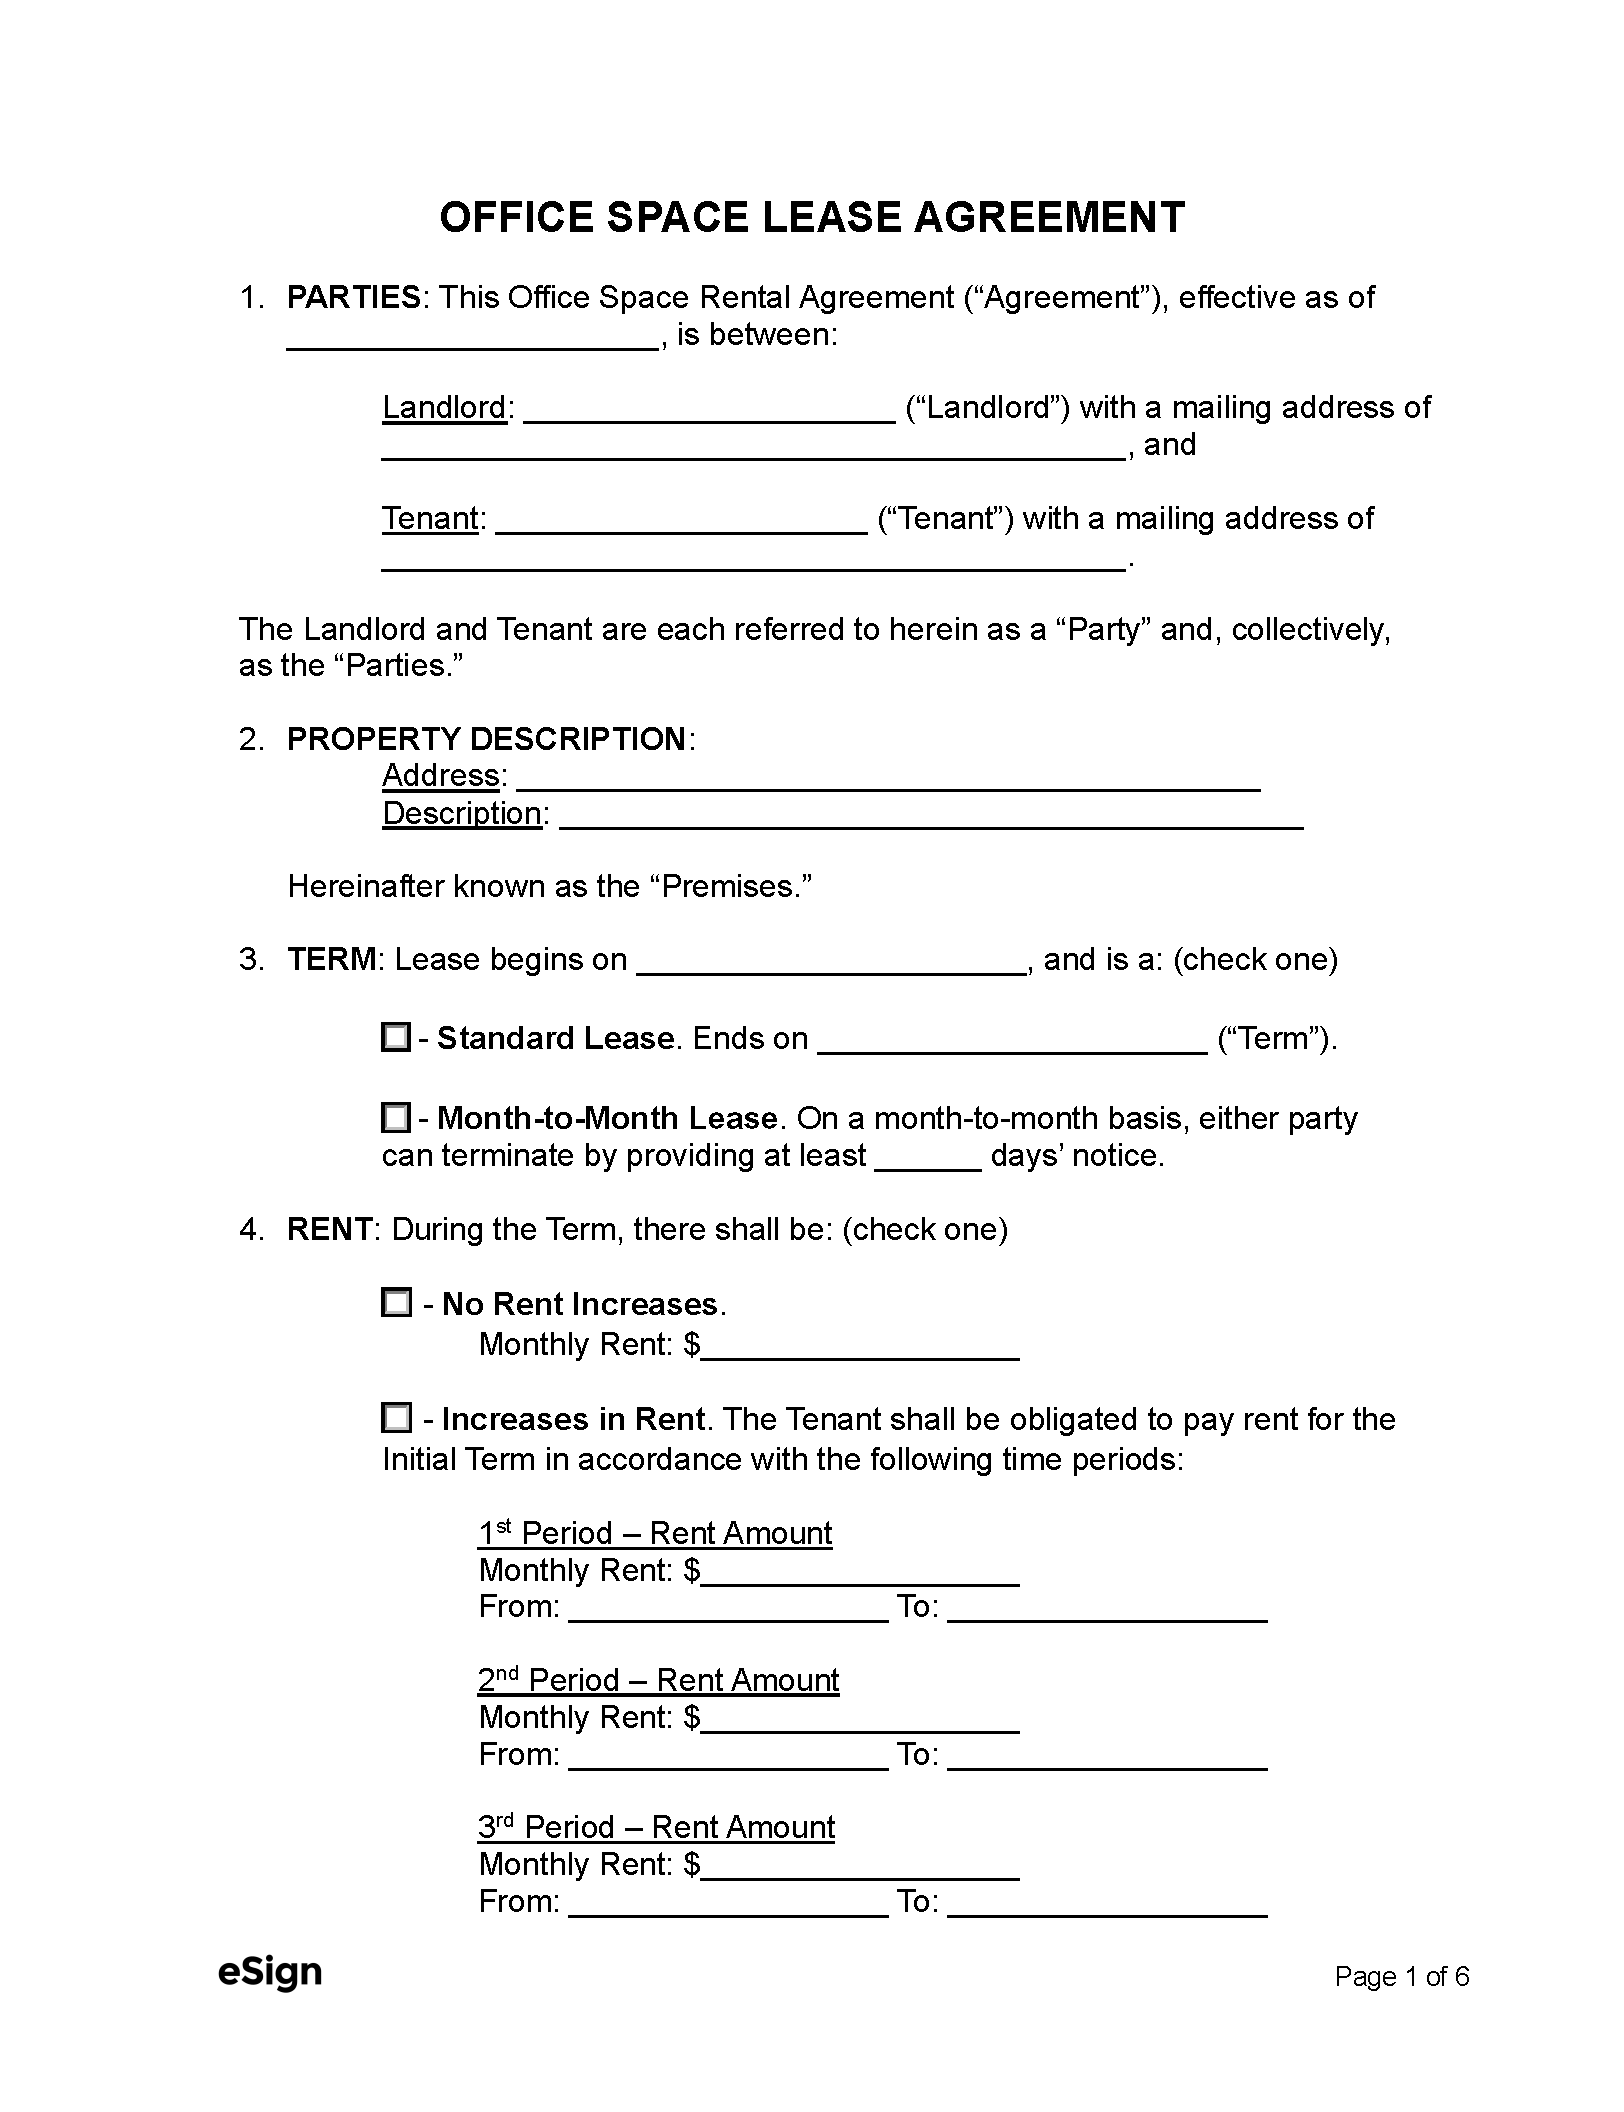 Office Space Lease Agreement 